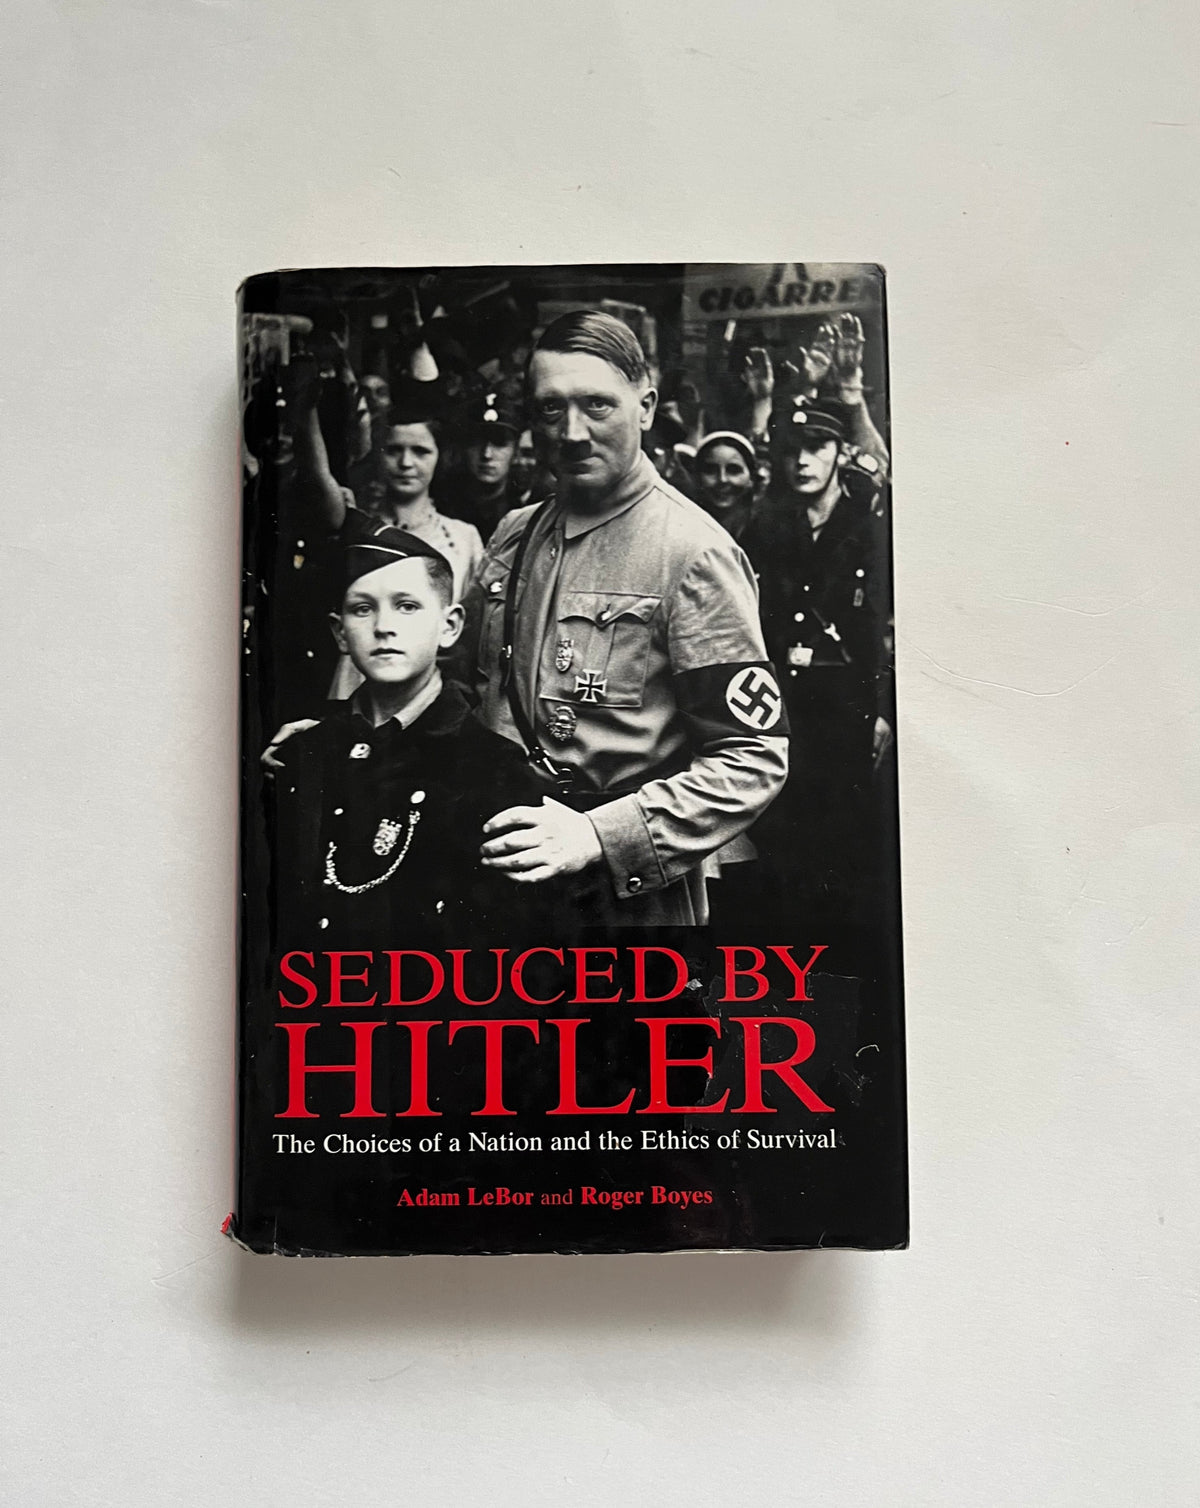 Seduced by Hitler: The Choices of a Nation and the Ethics of Survival by Adam Lebur &amp; Roger Boyes